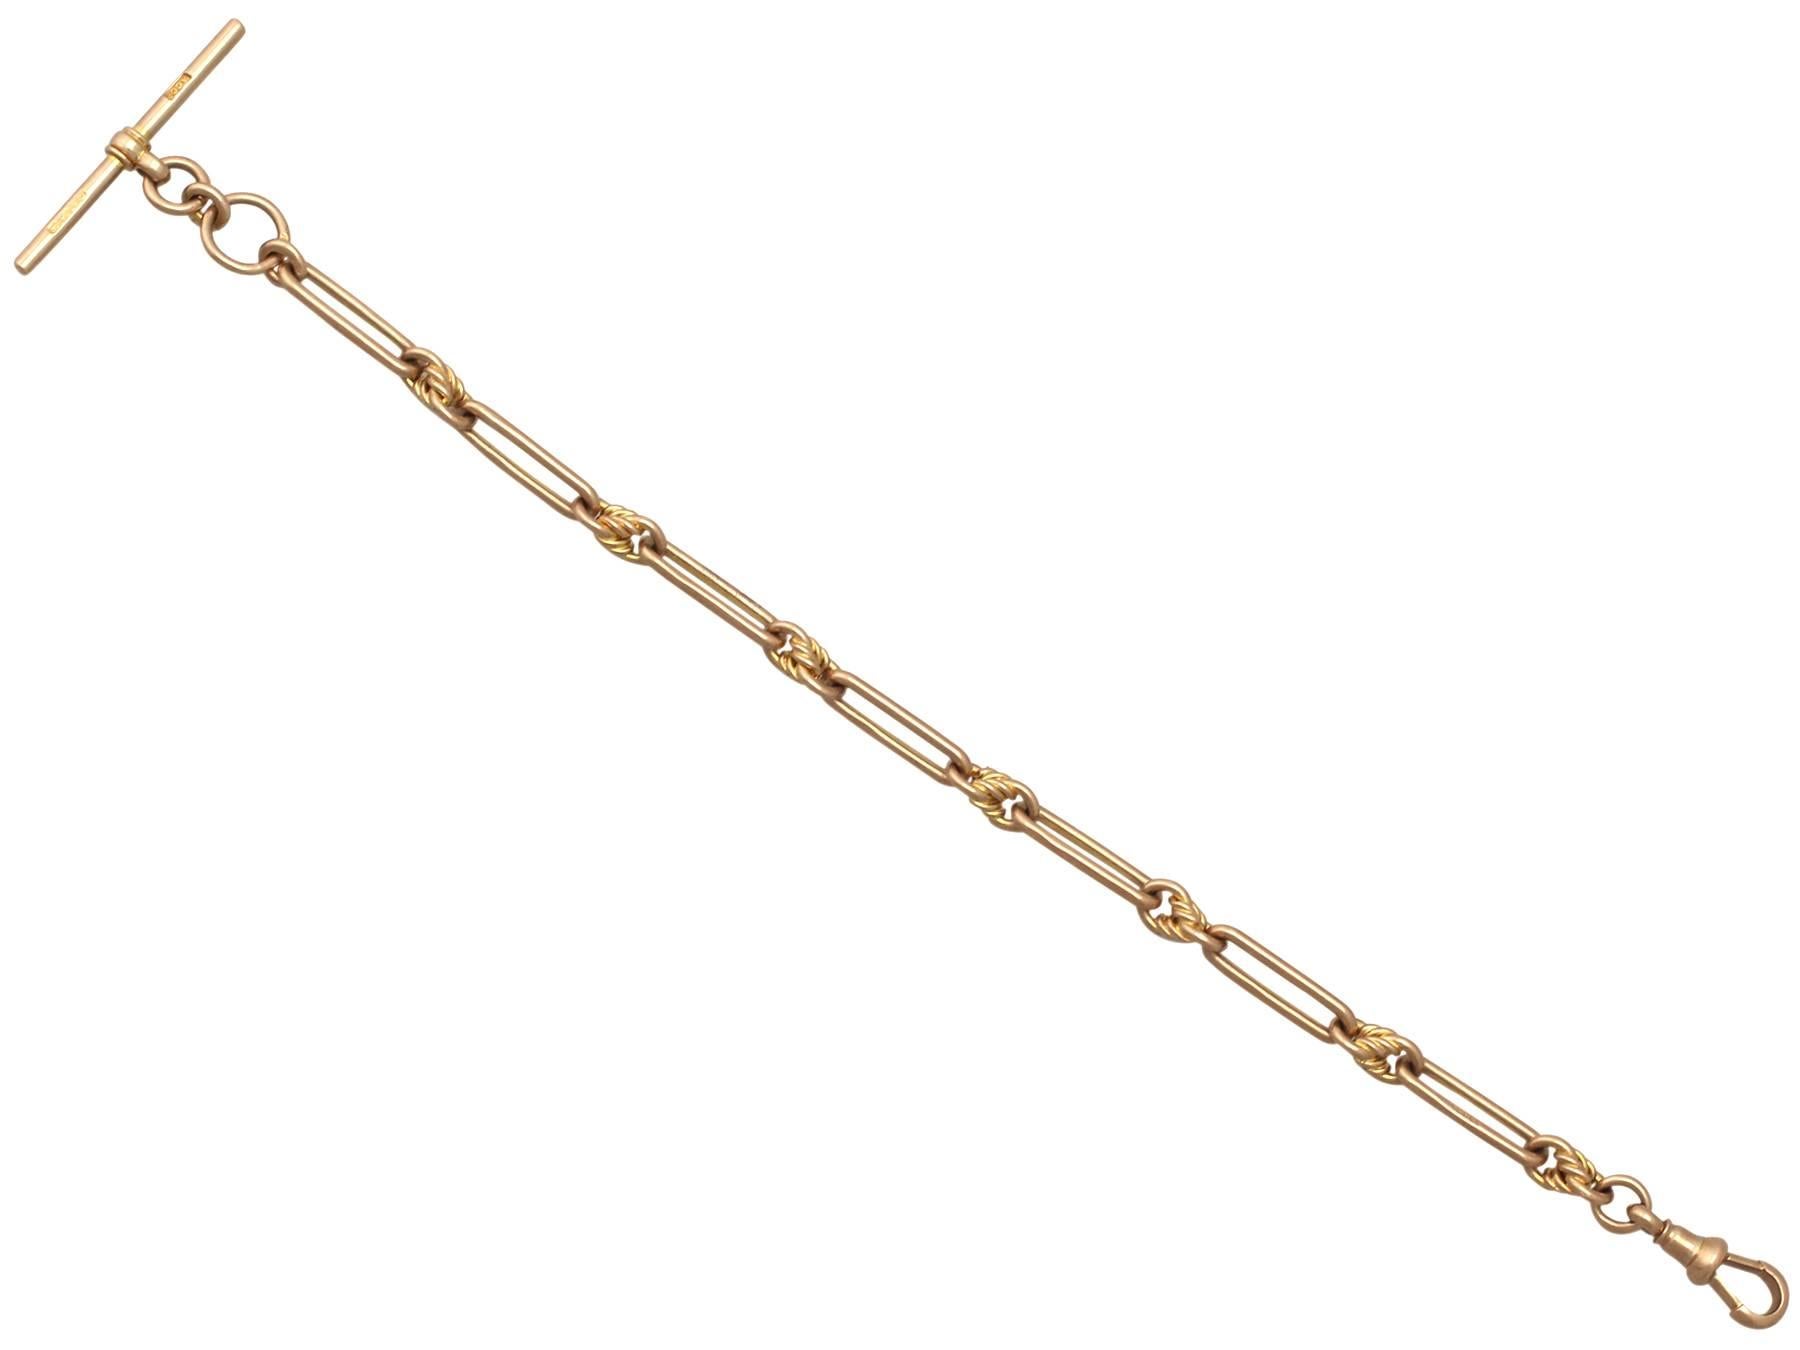 A fine and impressive antique 9 karat yellow gold Albert watch chain; part of our diverse antique jewelry and estate jewelry collections

This fine and impressive fancy watch chain has been crafted in 9k yellow gold.

The impressive Albert watch